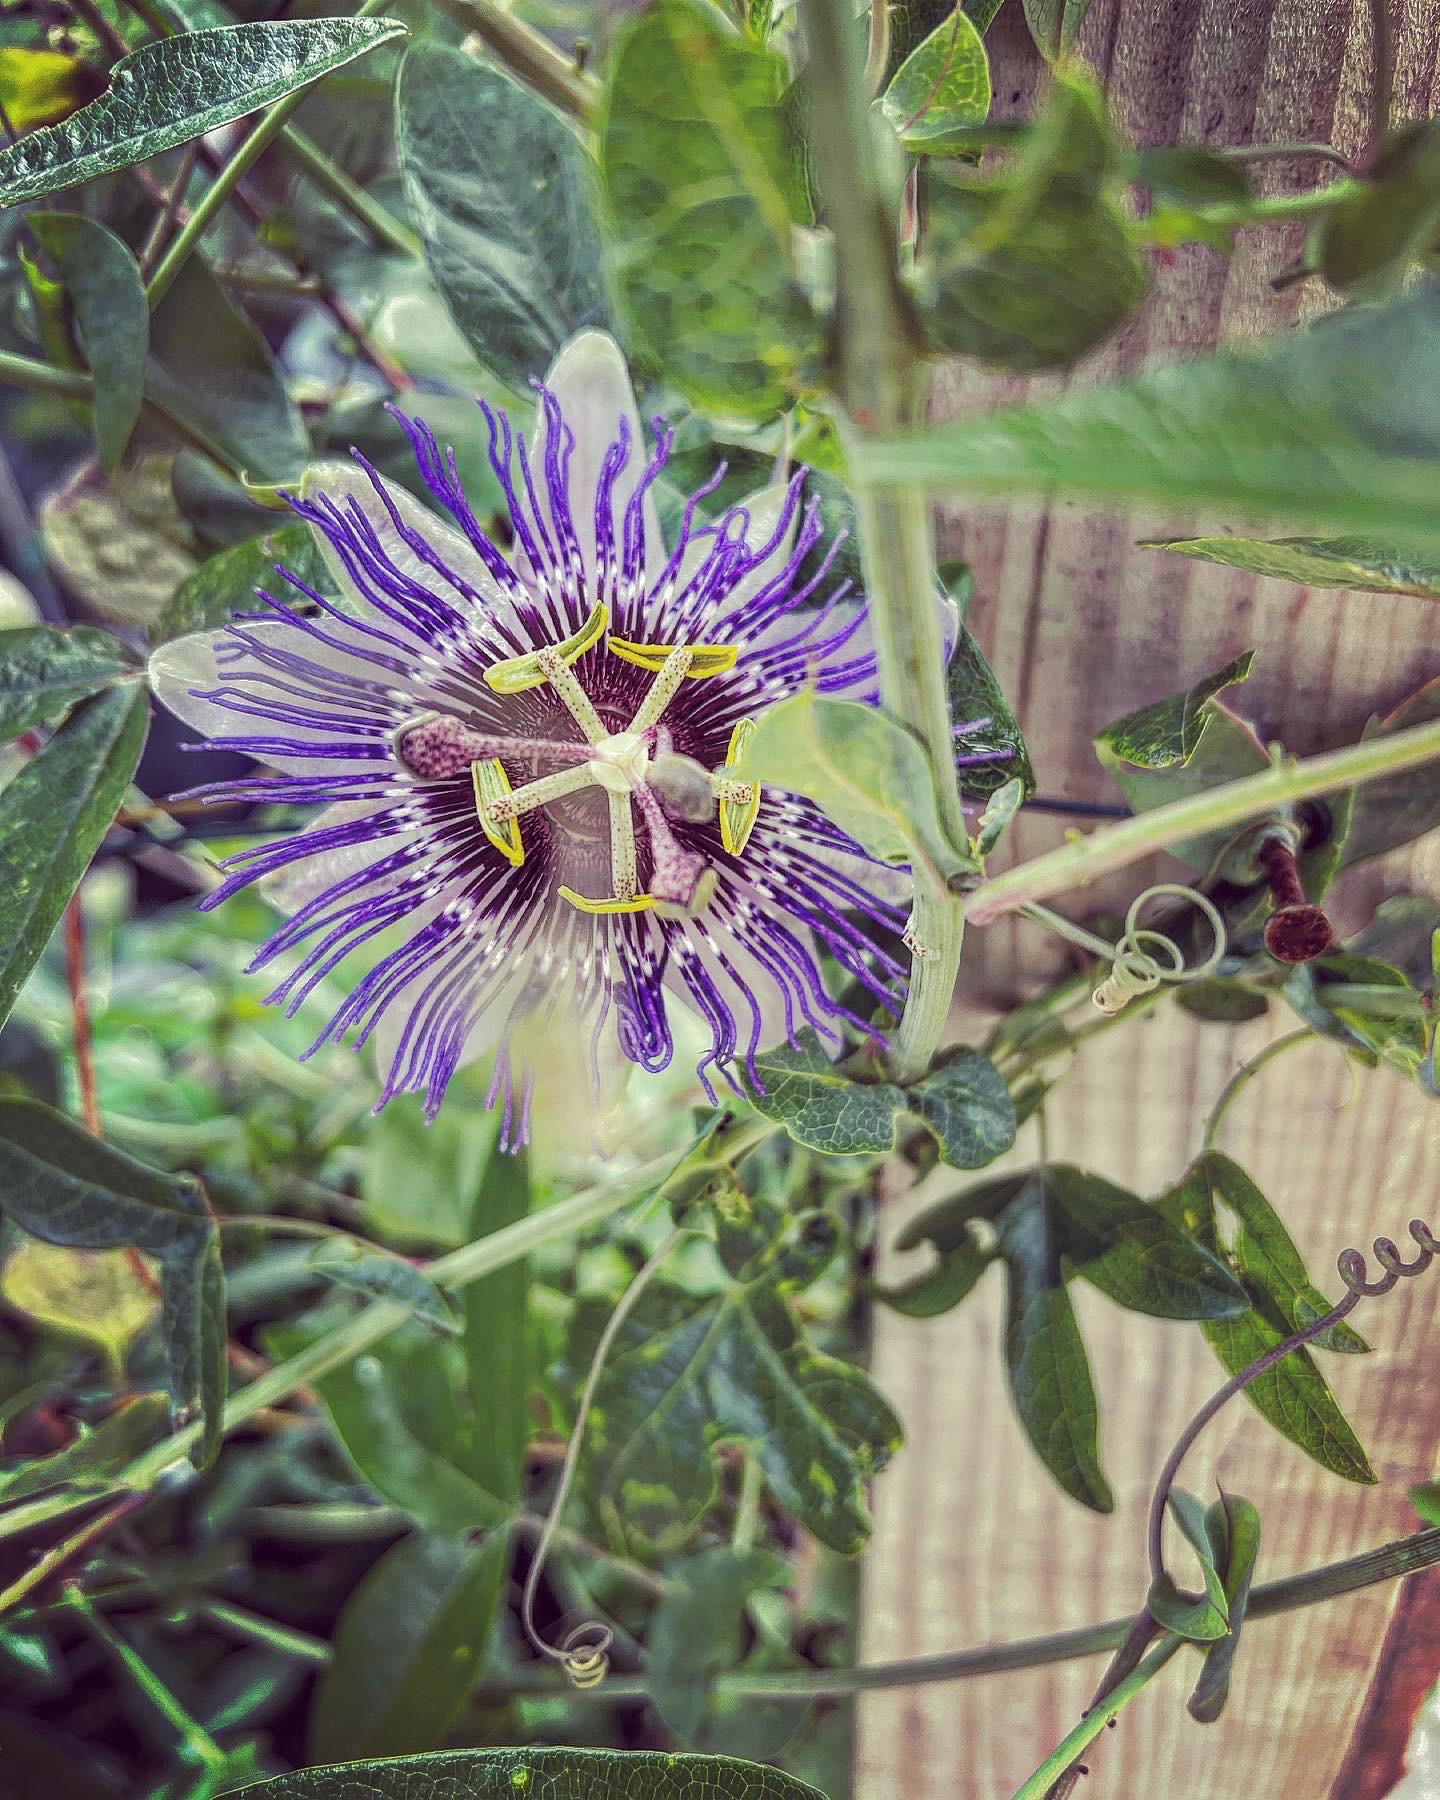 Blooming passionflowers.